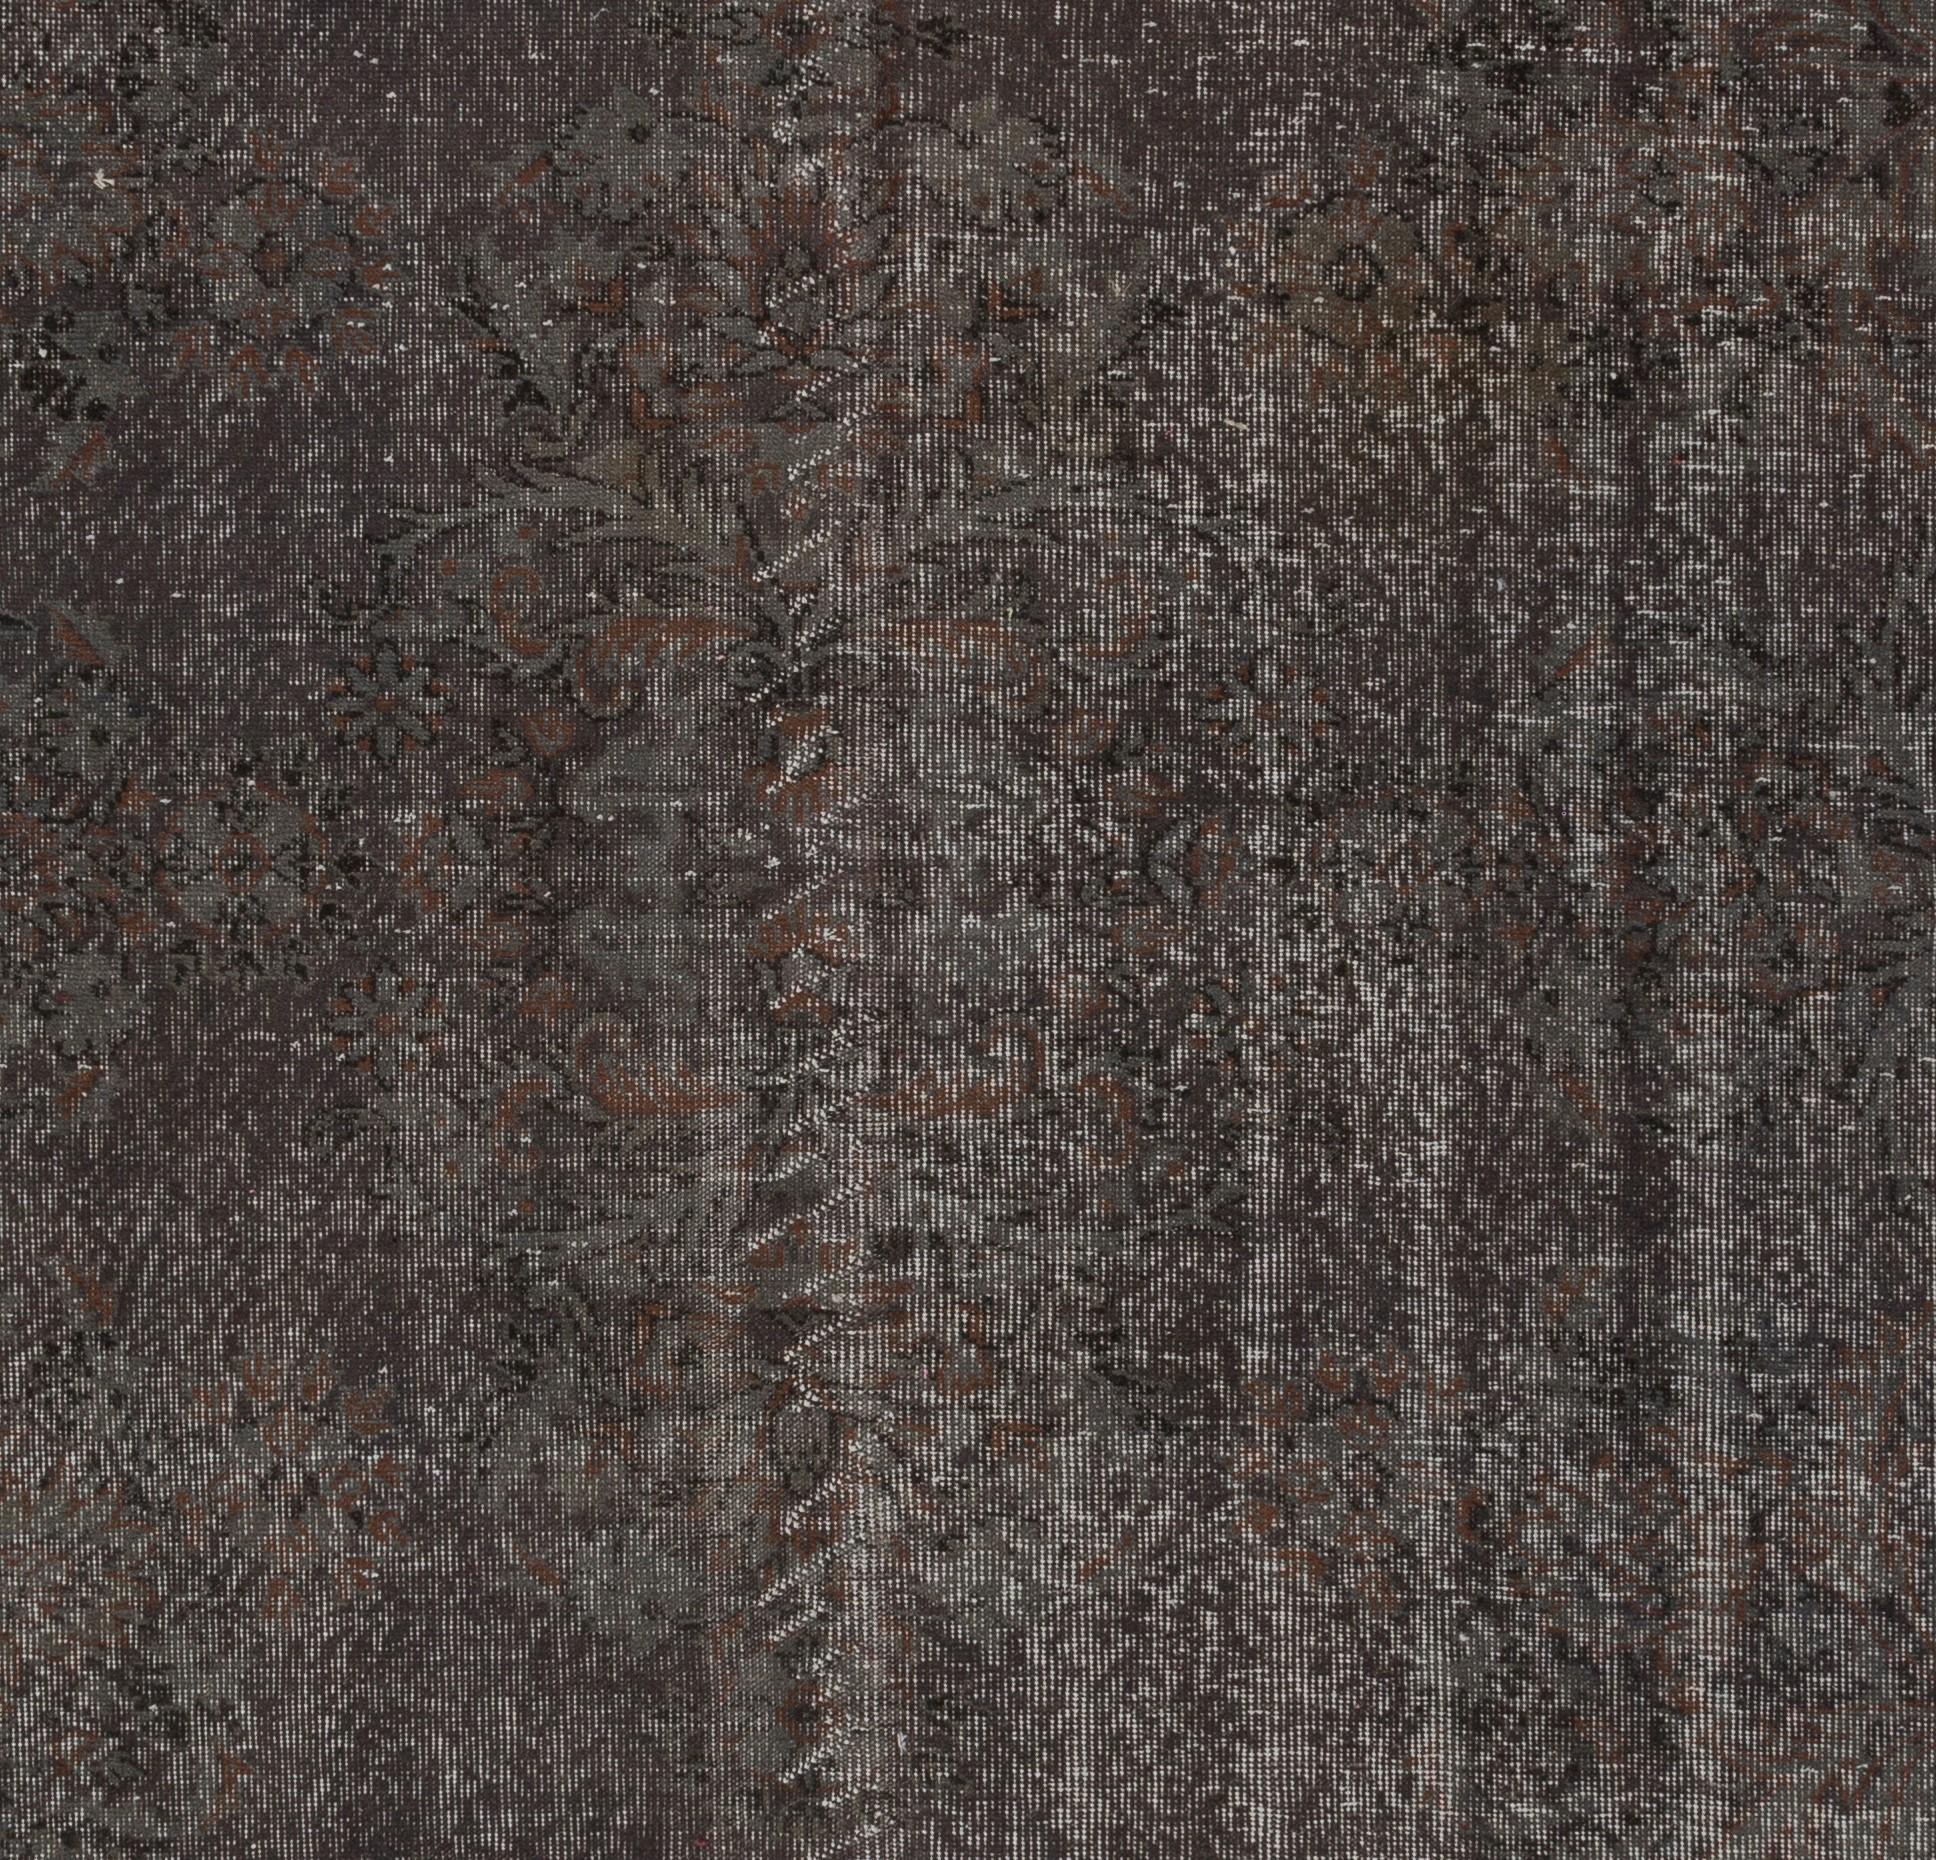 Hand-Woven 6.7x10.2 Ft Vintage Handmade Upcycled Turkish Wool Area Rug in Gray & Taupe For Sale